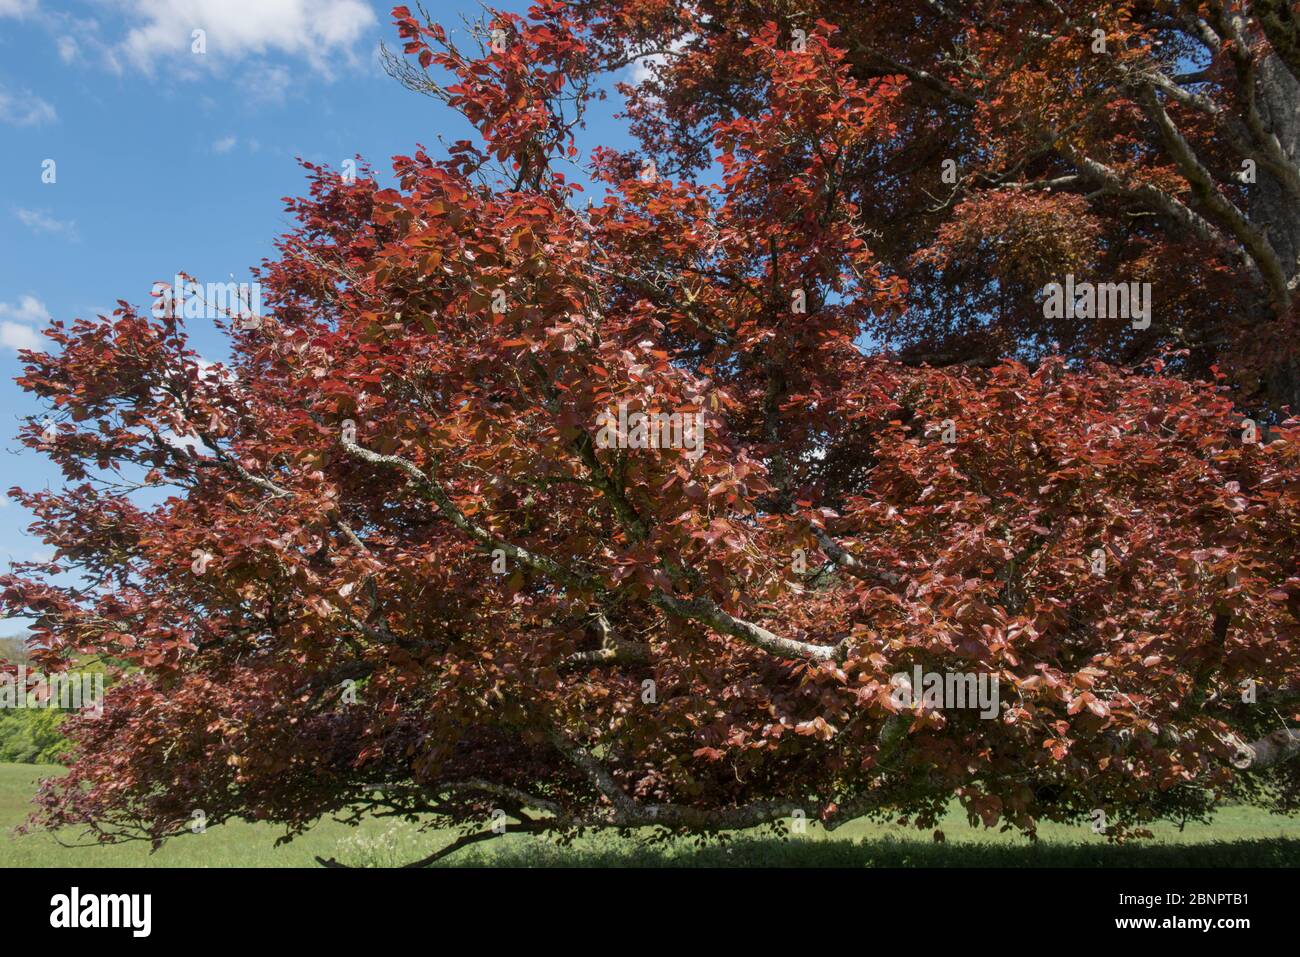 Spring Leaves of an Ancient Copper Beech Tree (Fagus sylvatica purpurea) Growing in a Field in a Countryside Landscape in Rural Devon, England, UK Stock Photo